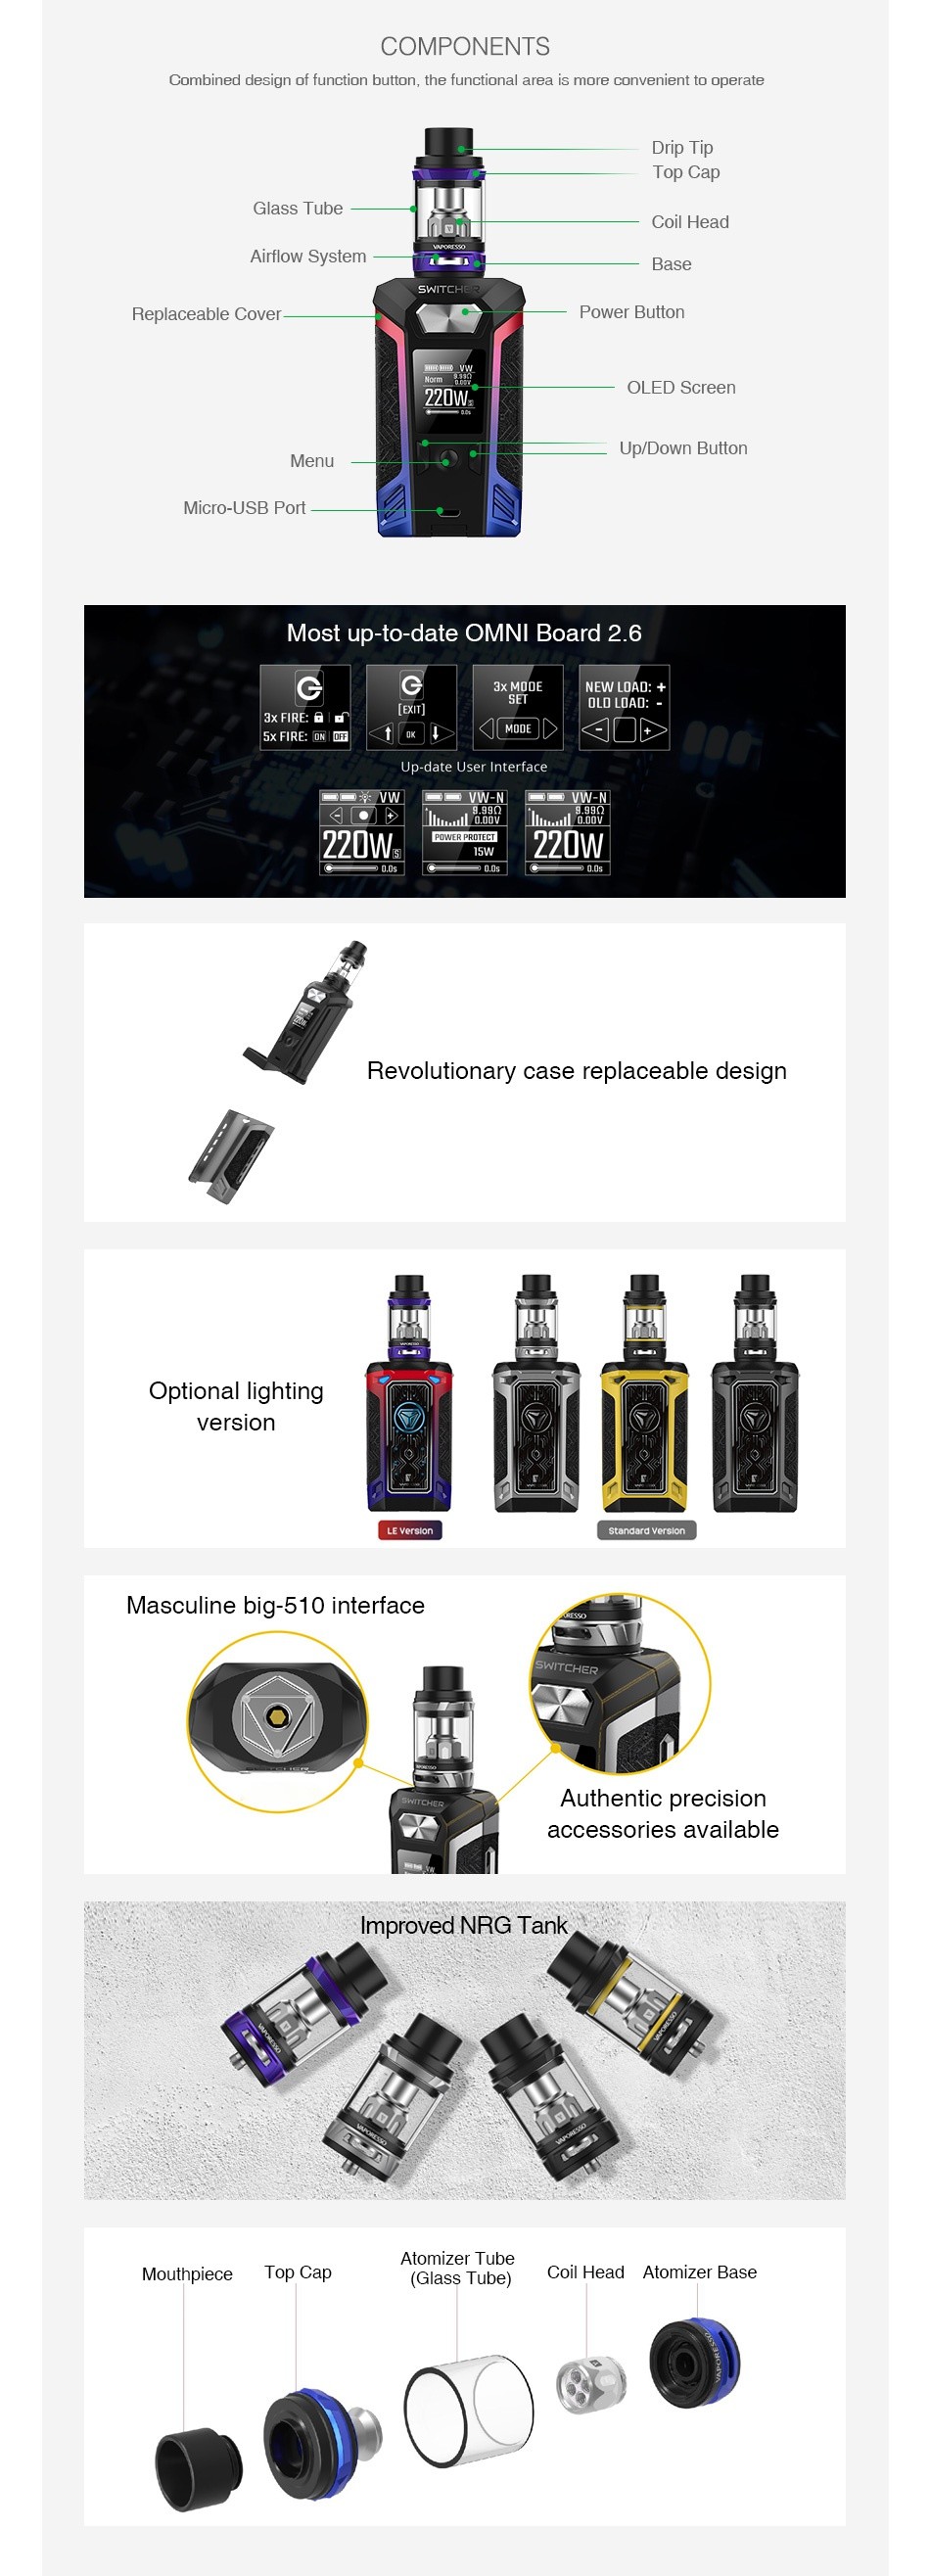 Vaporesso Switcher 220W with NRG TC Kit COMPONENTS Combined design of function button  the functional a rea is more convenient to operate Drip lIp Top Cap lass Tube Coil Head Airflow System Replaceable Cove Power Billor 20V Menu Up Down Button Micro USB Port Most up to date OMNI Board 2 6 G 220Ws D7 5w Revolutionary case replaceable design Optional lighting version   standerd Masculine big 510 interface Authentic precision accessories available Improved NRG Tank Atomizer Tube Top Cap Coil Head Atomizer base